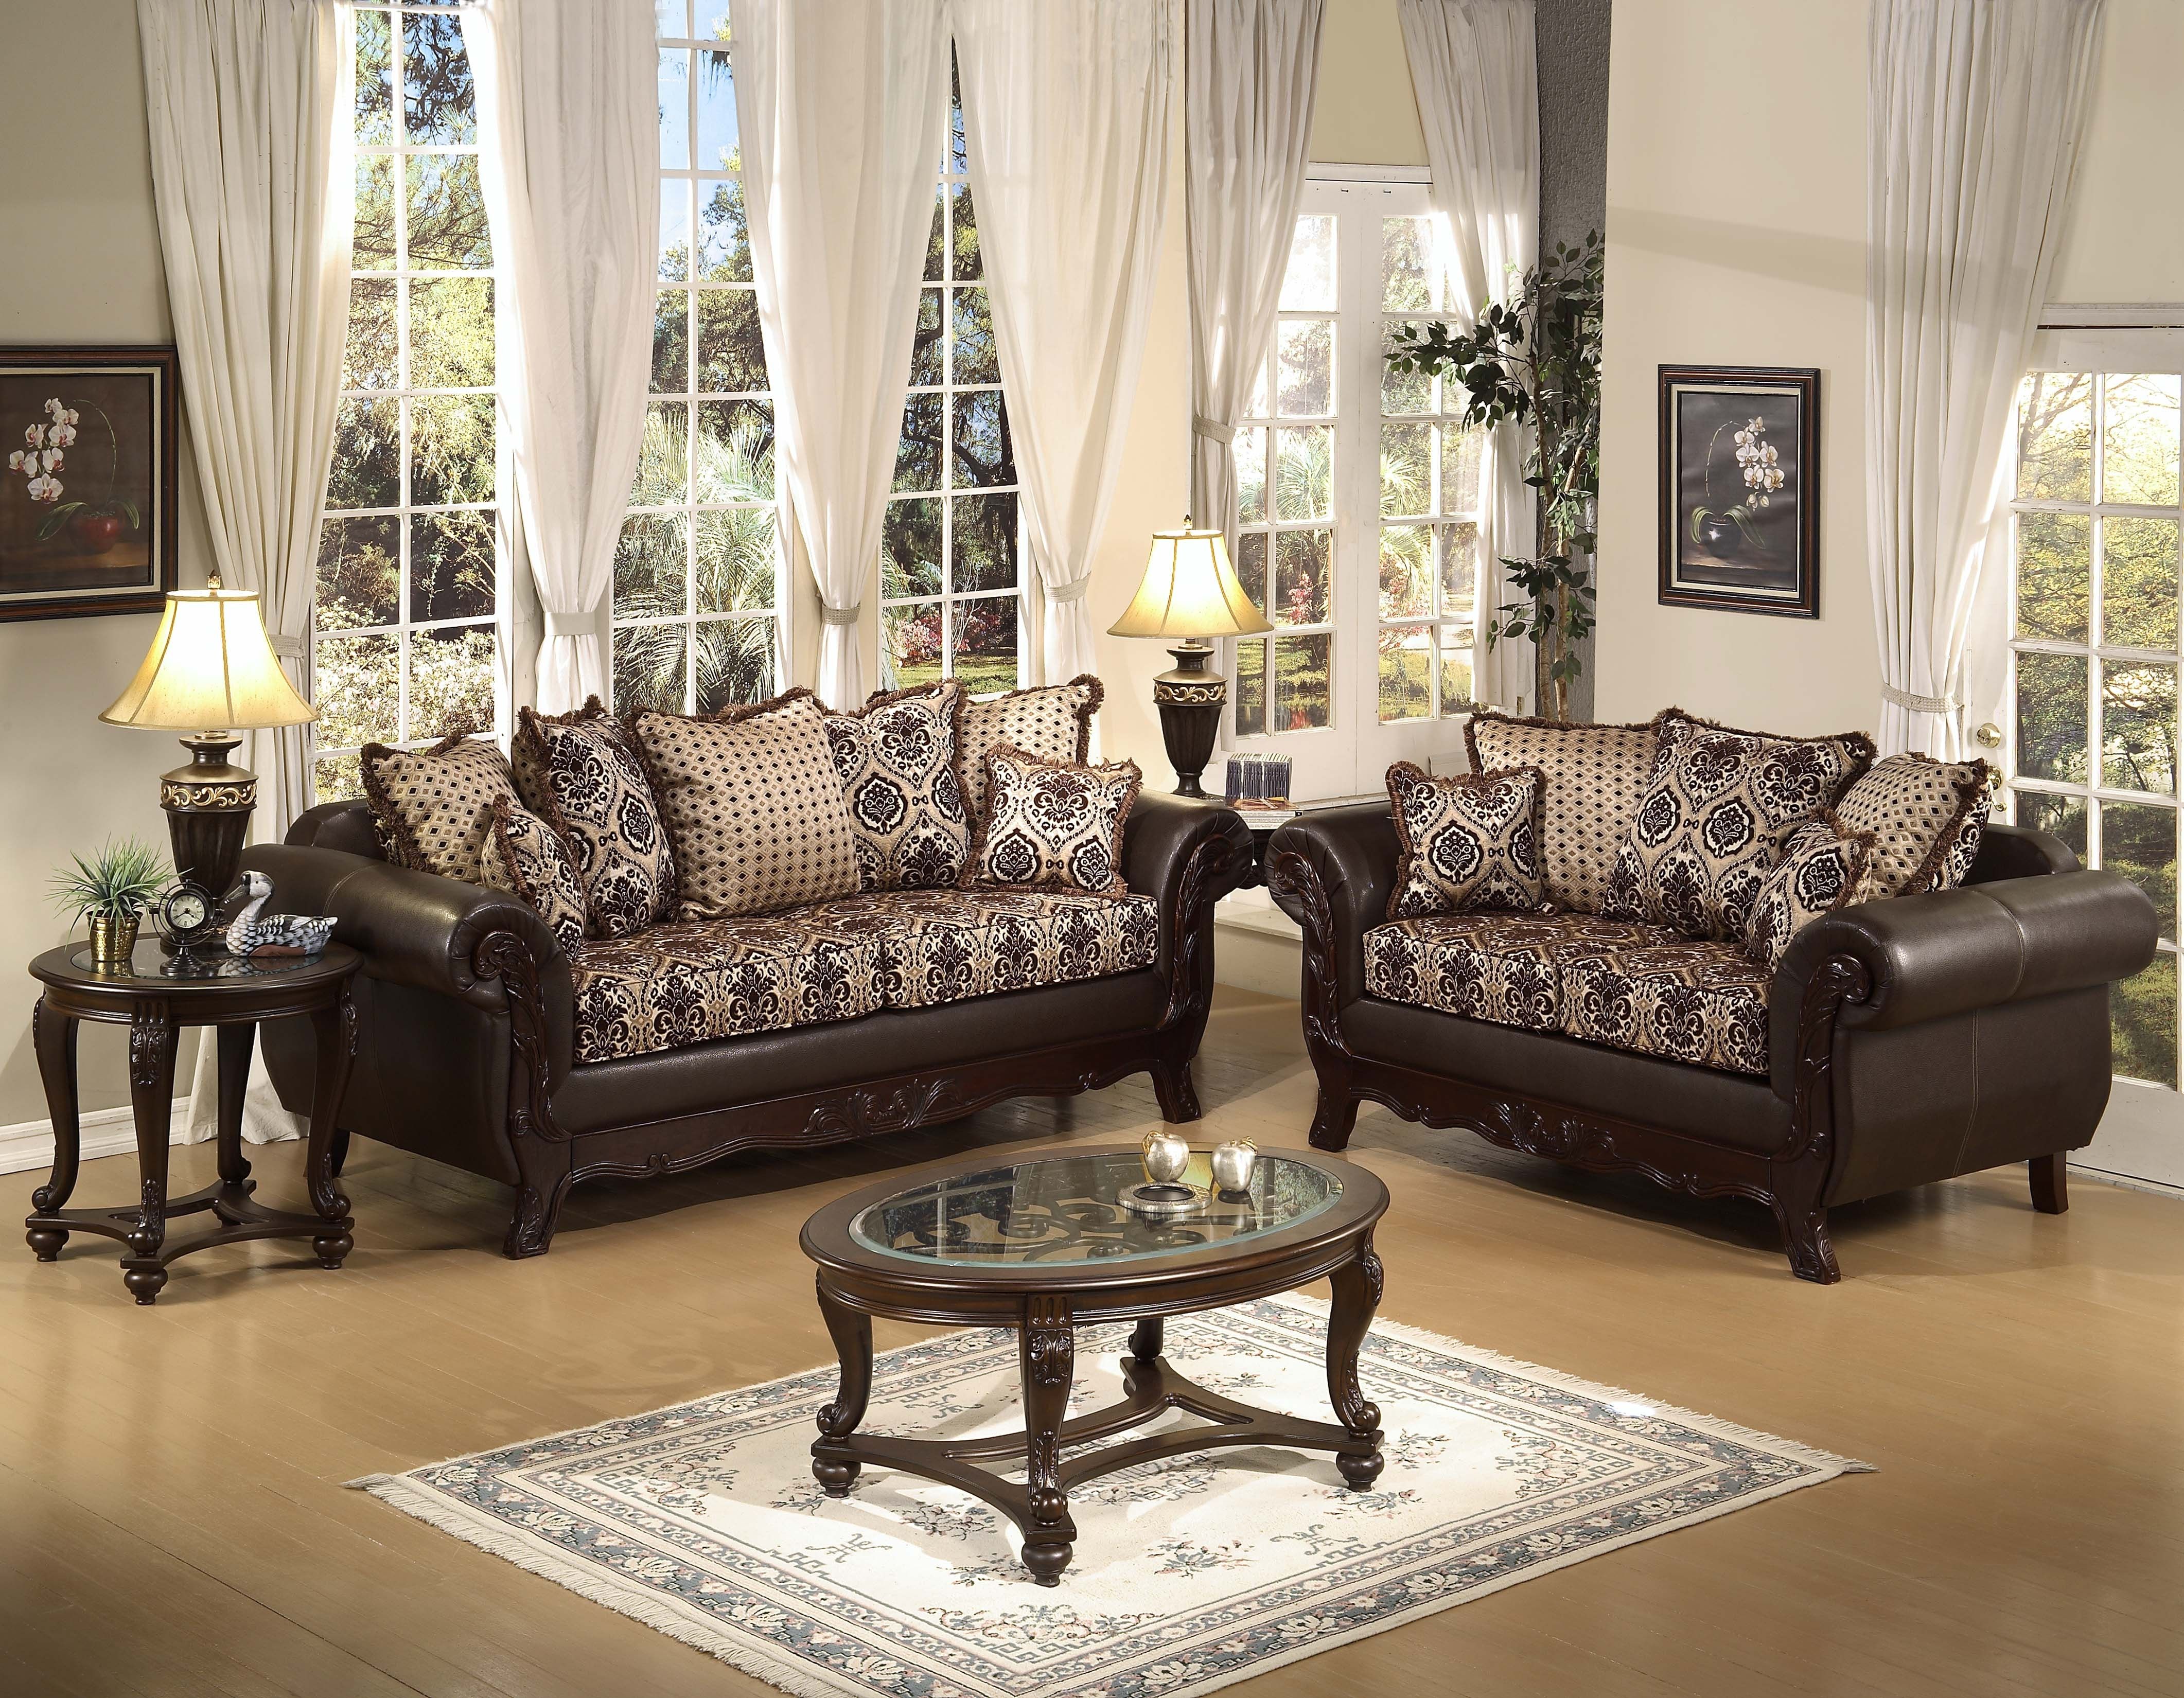 Aarons Living Room Sets With Leather Furniture Collection Images Intended For Sectional Sofas At Aarons (View 8 of 10)